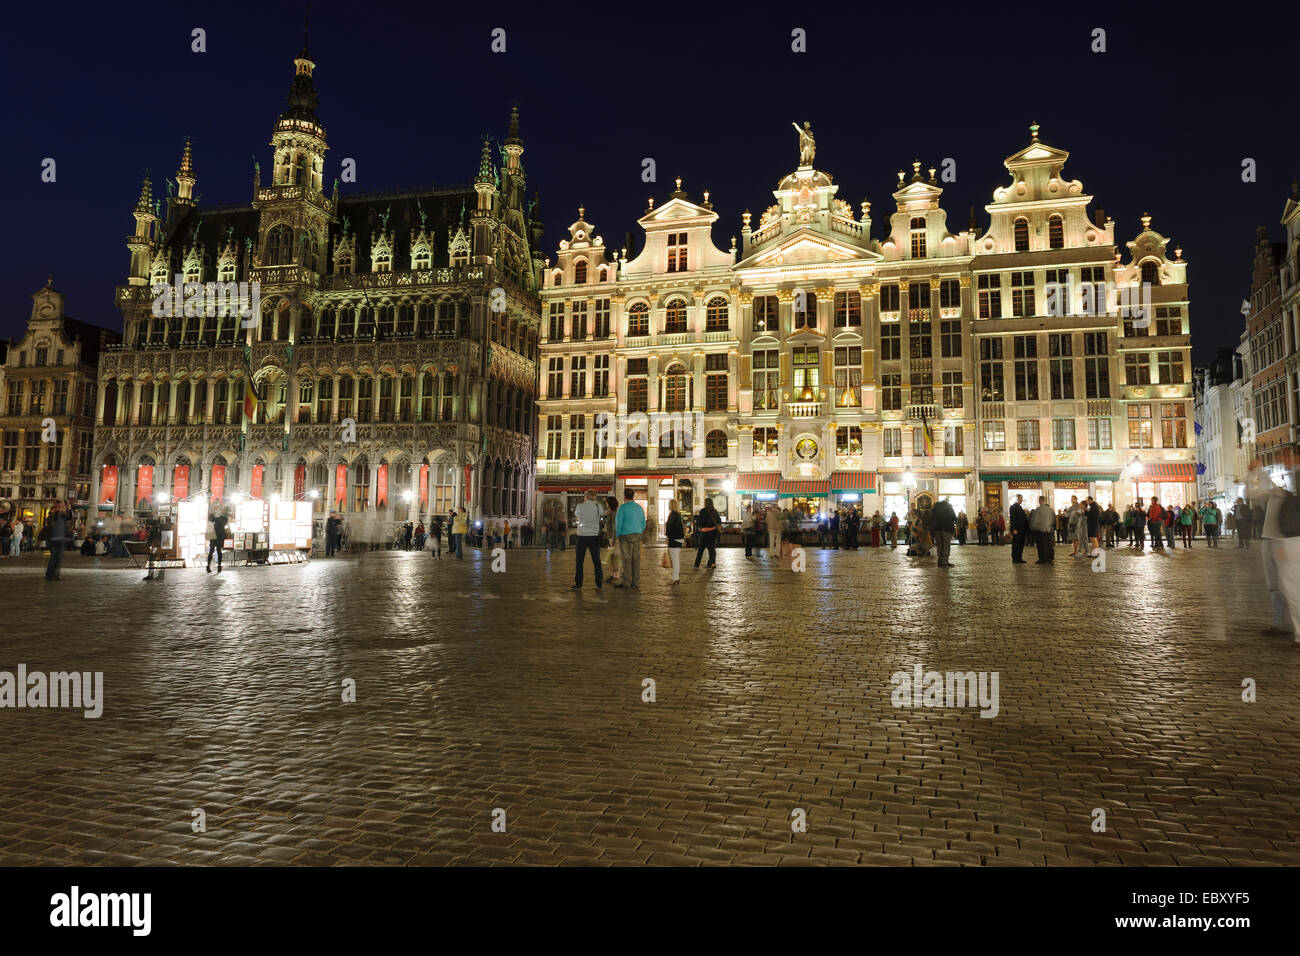 Royal House or Maison du Roi and Chaloupe d'Or, Grote Markt, Grand Place market square, illuminated at night, Brussels Stock Photo